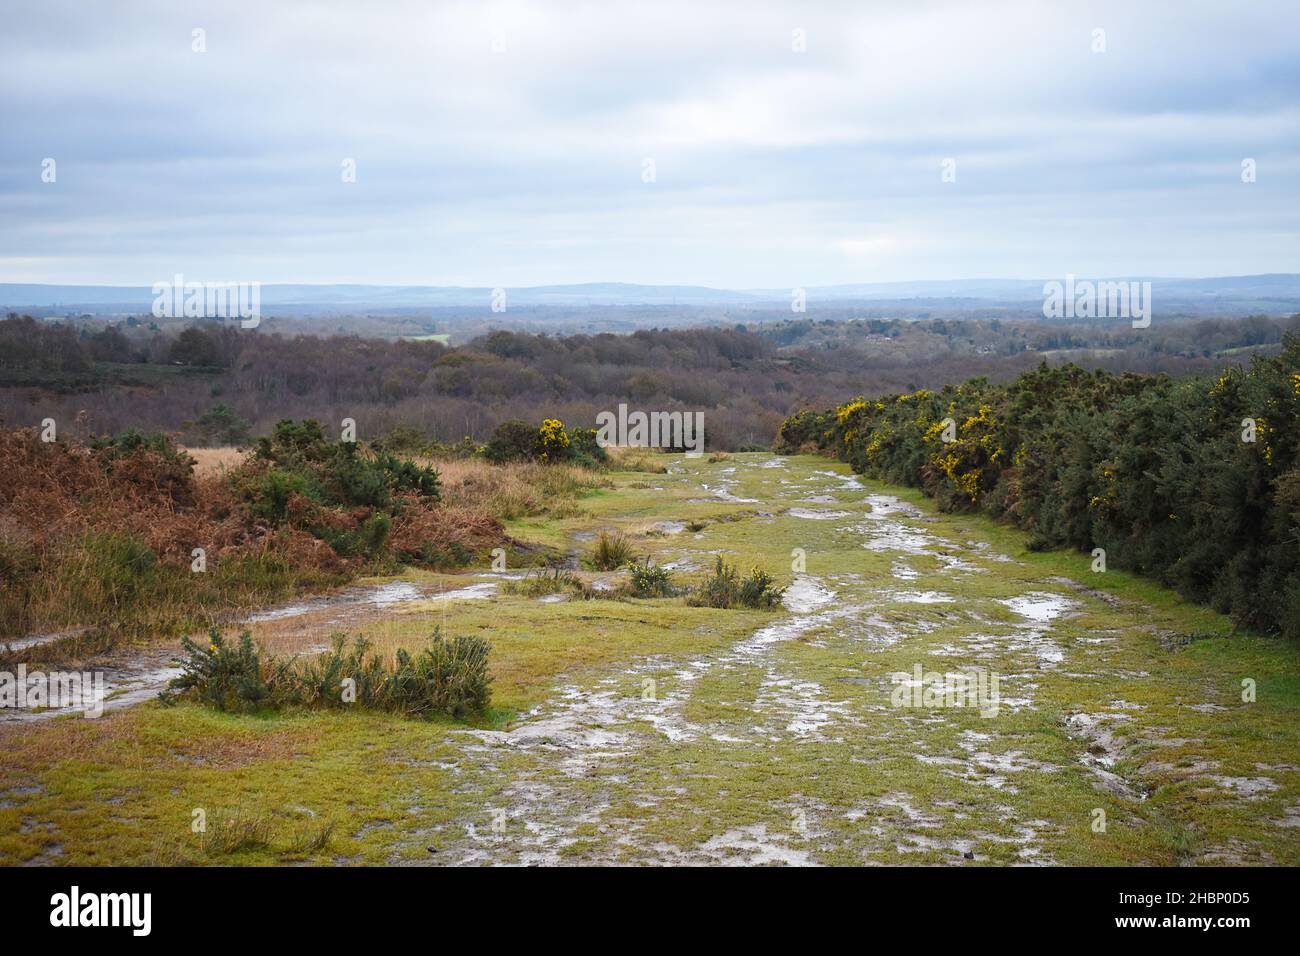 Ashdown Forest view in East Sussex, UK. Located in the High Weald Area of Outstanding Natural Beauty, a wet muddy grass footpath leads away. Stock Photo